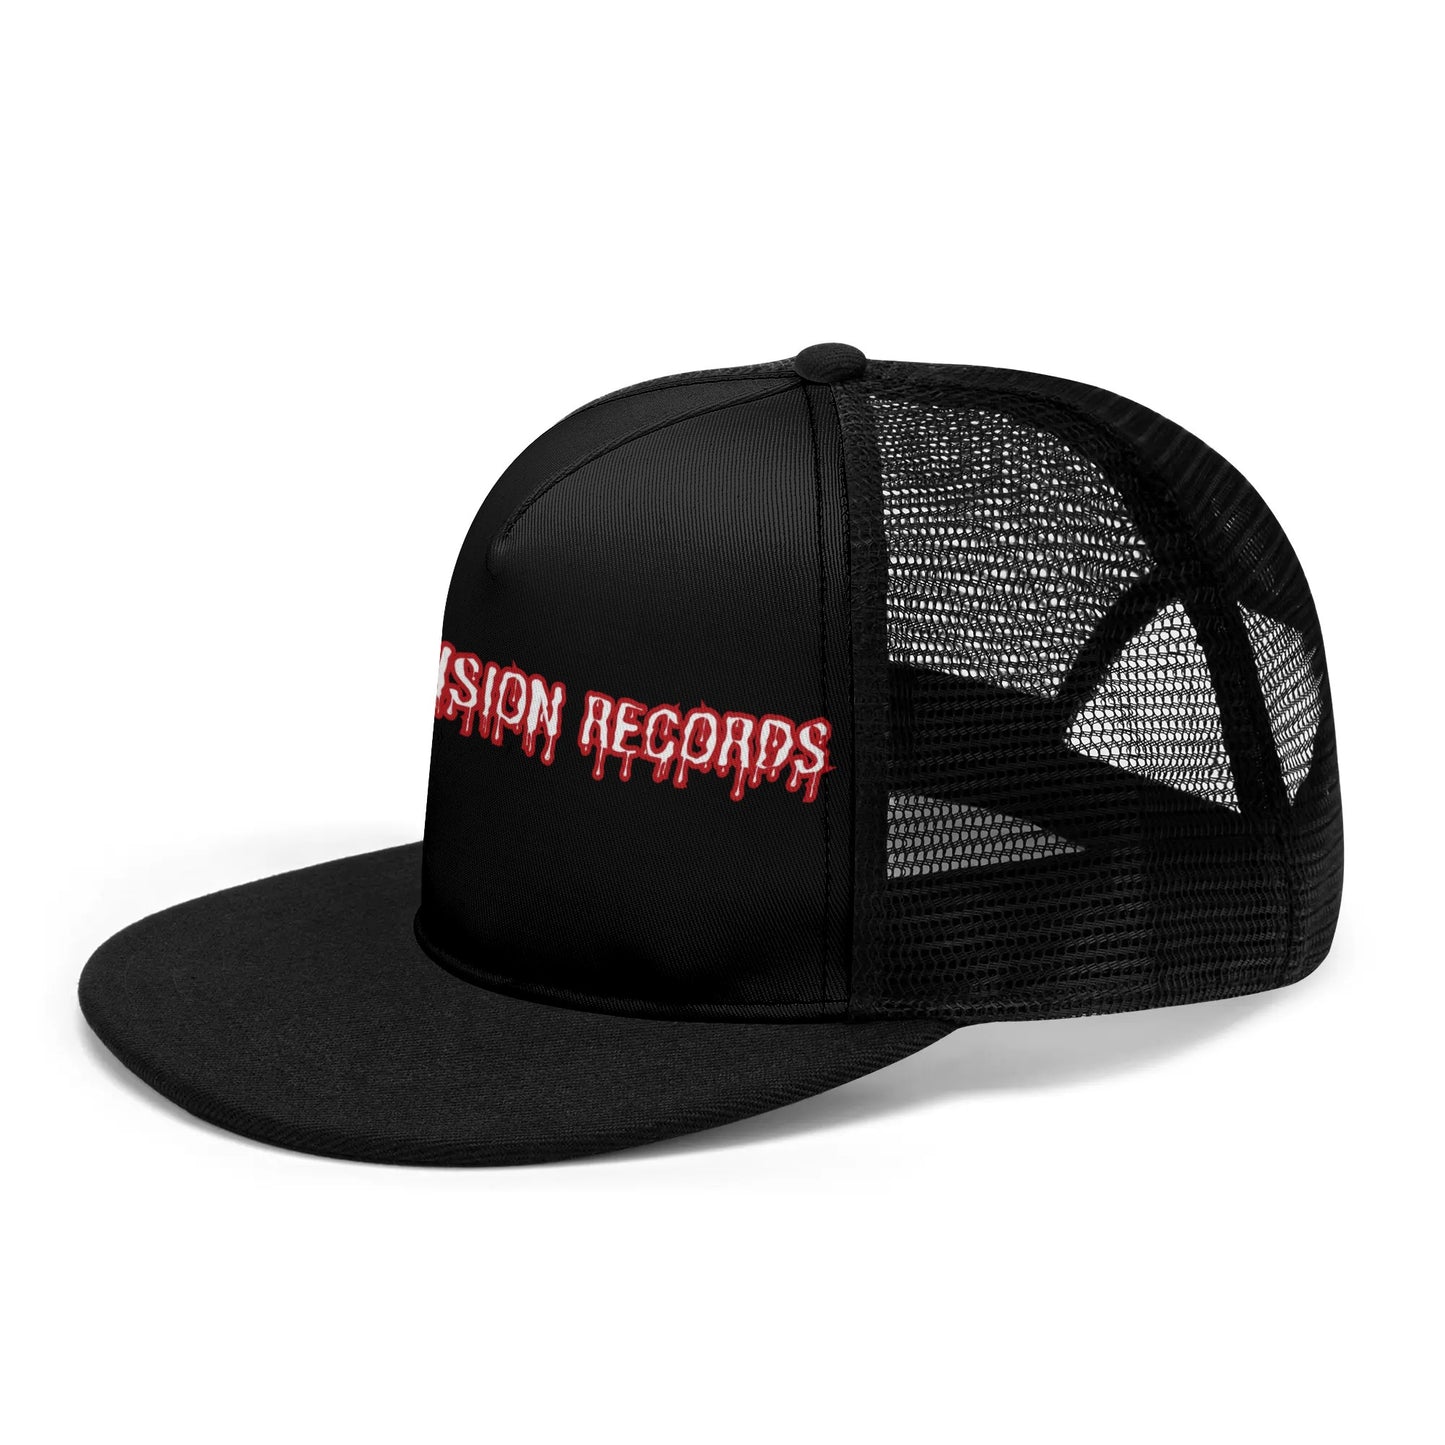 Eyes of Division Records snapback trucker hat